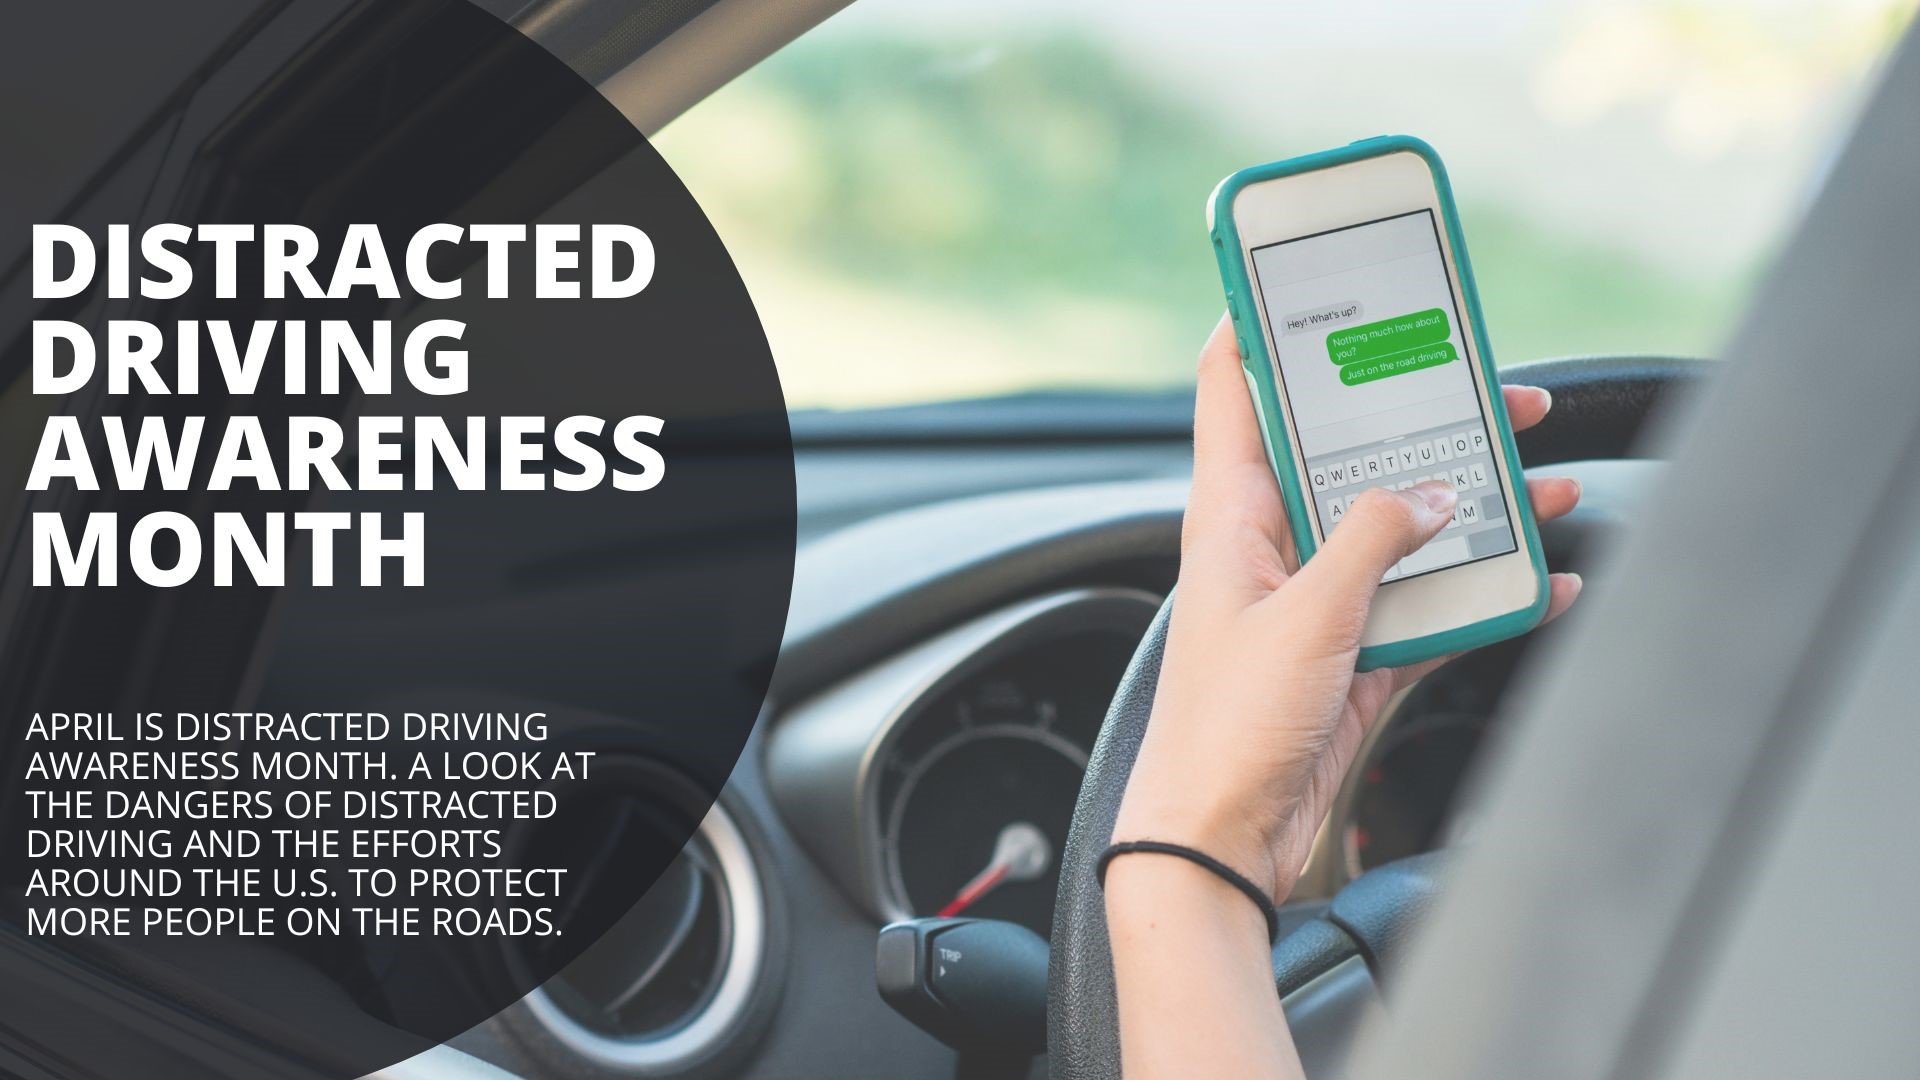 April is Distracted Driving Awareness Month. A look at the dangers of distracted driving and the efforts around the U.S. to protect more people on the roads.